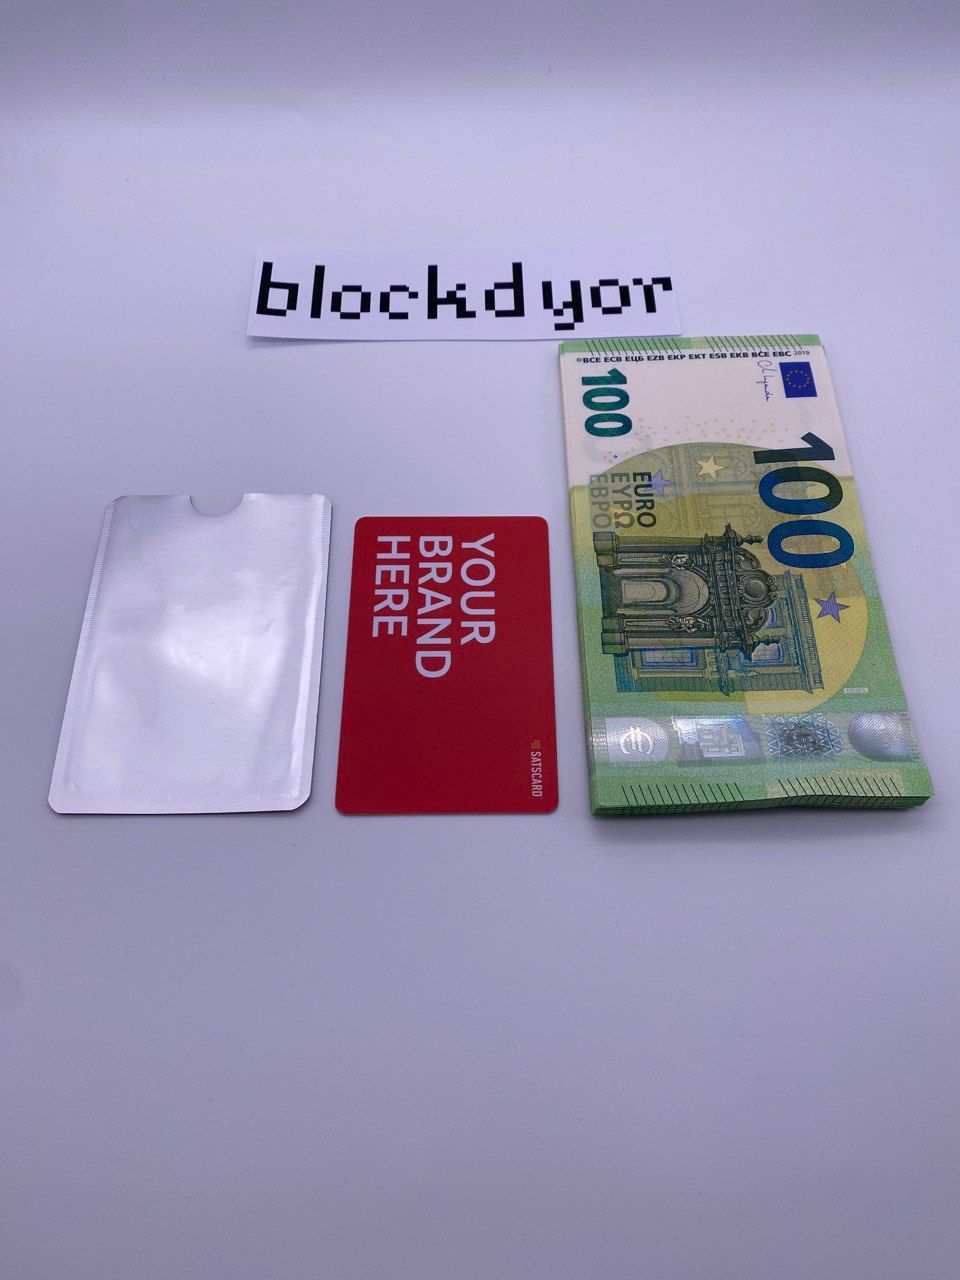 The RF-blocking sleeve (left), the SATSCARD (middle) and a bunch of cash for size comparison